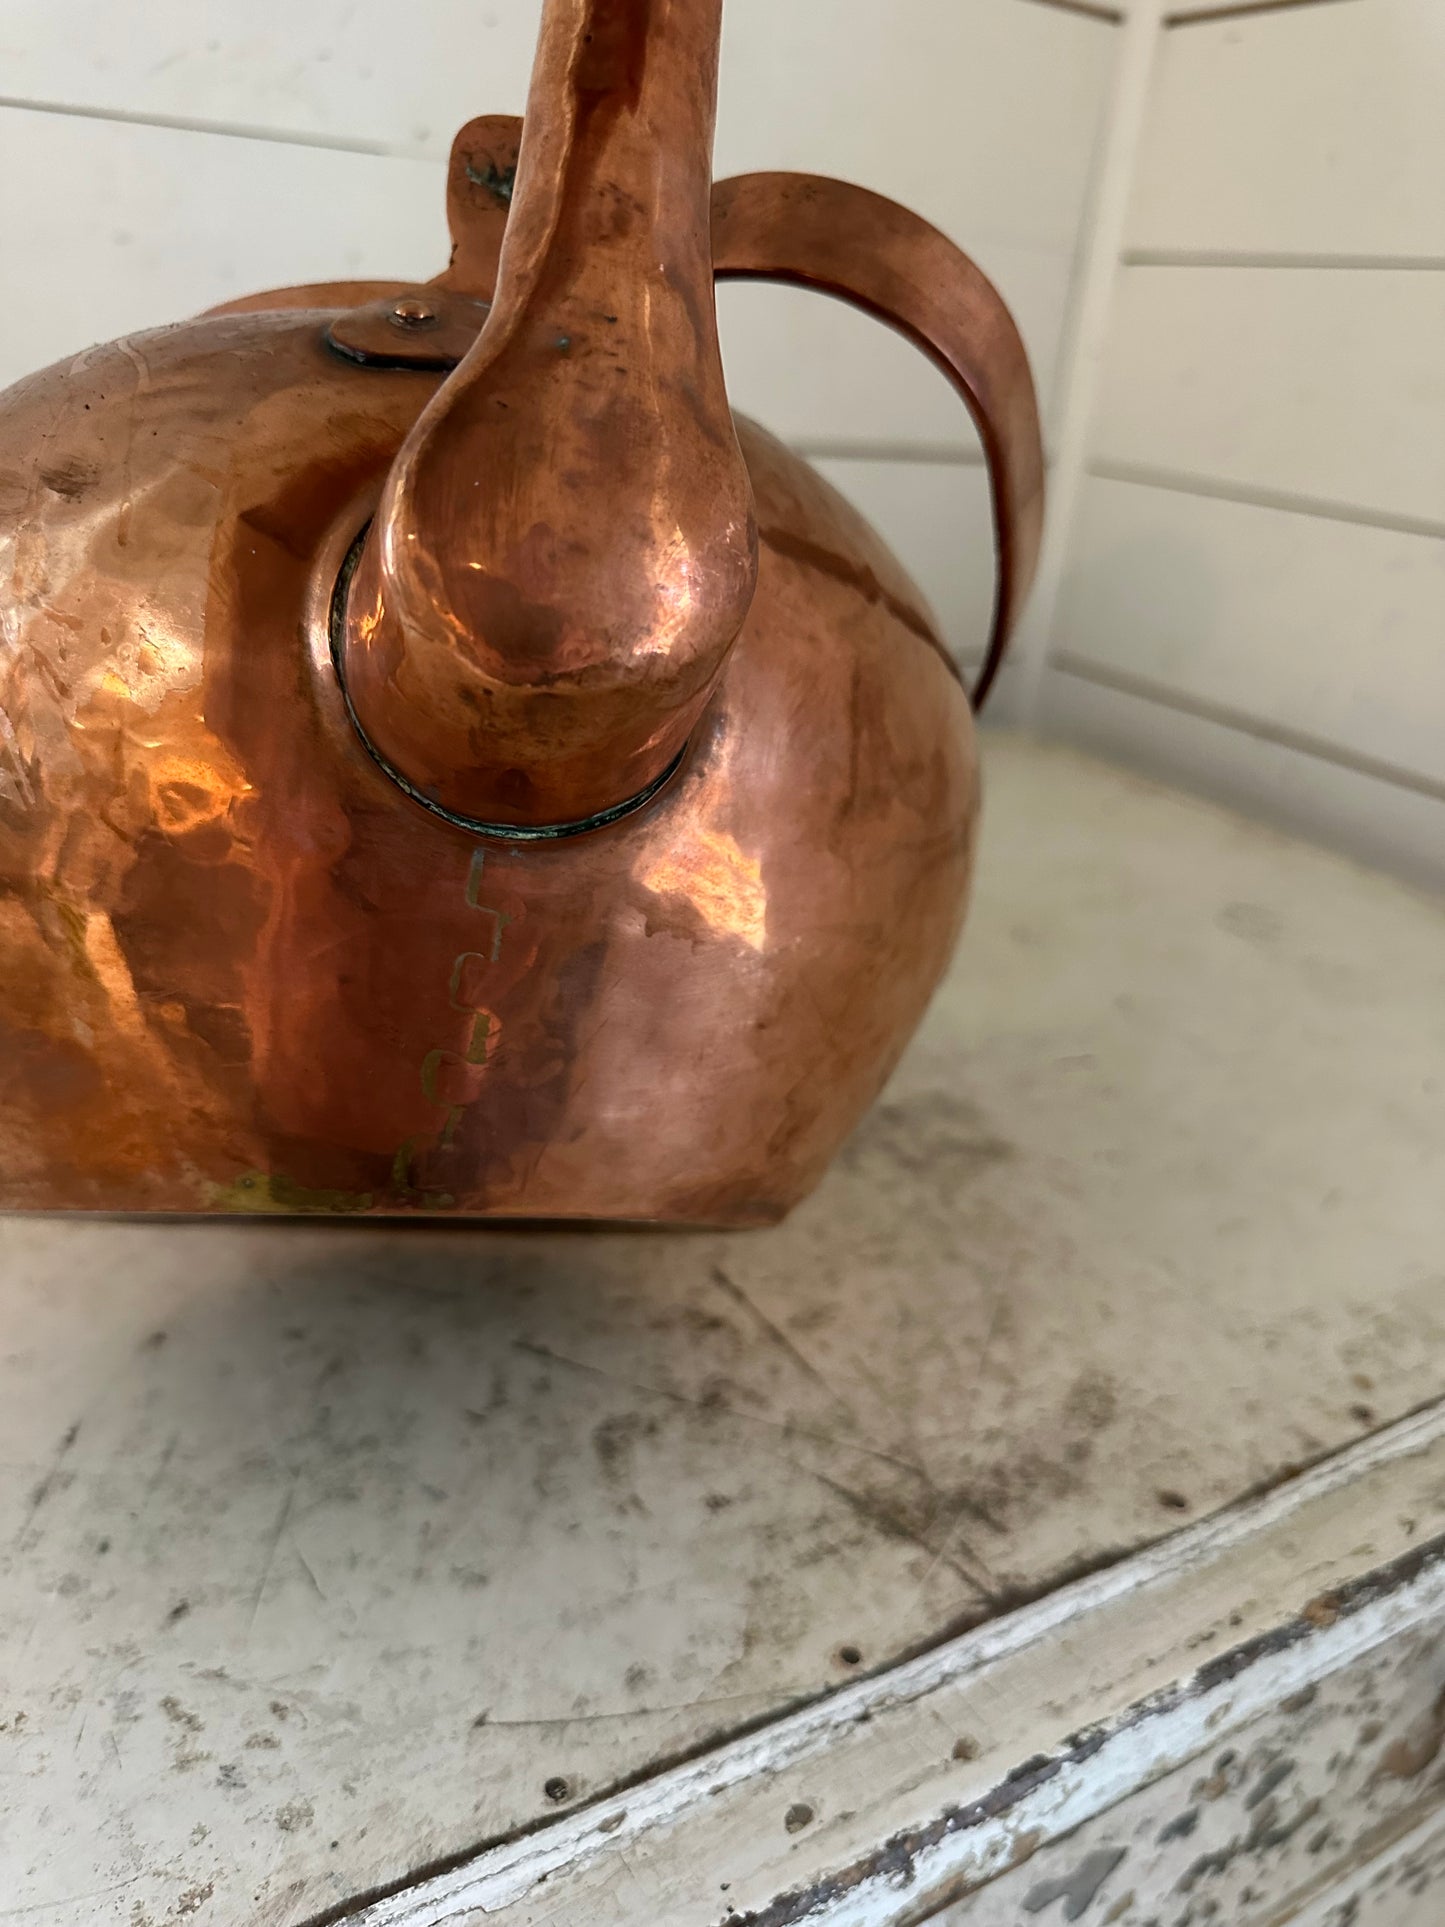 19th Century Copper Kettle has a repair on top